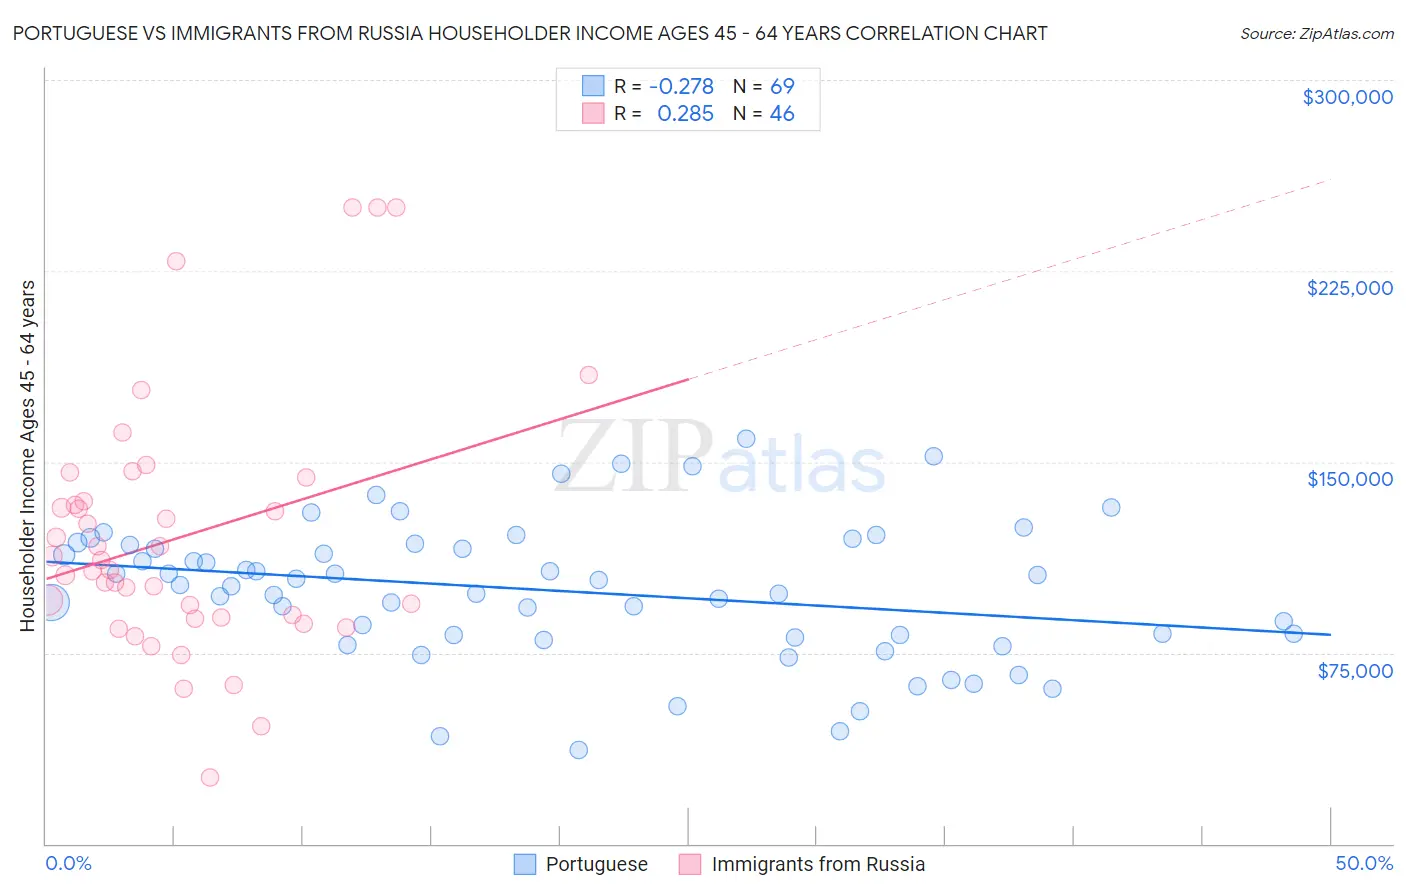 Portuguese vs Immigrants from Russia Householder Income Ages 45 - 64 years